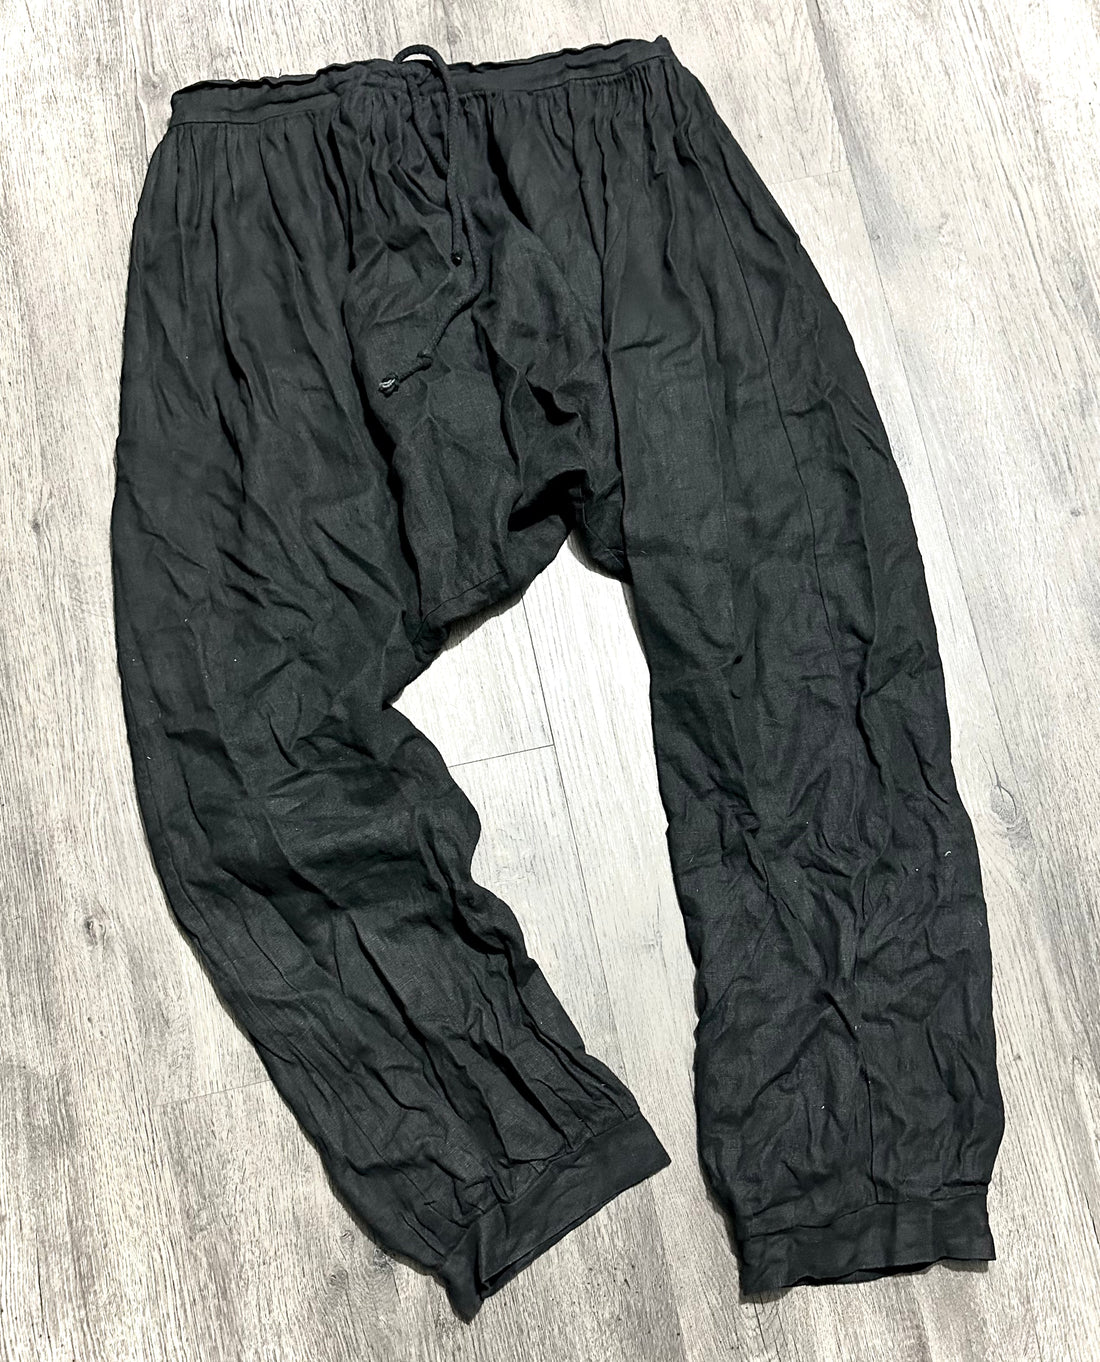 Harii pants used by Obban (Heilung)